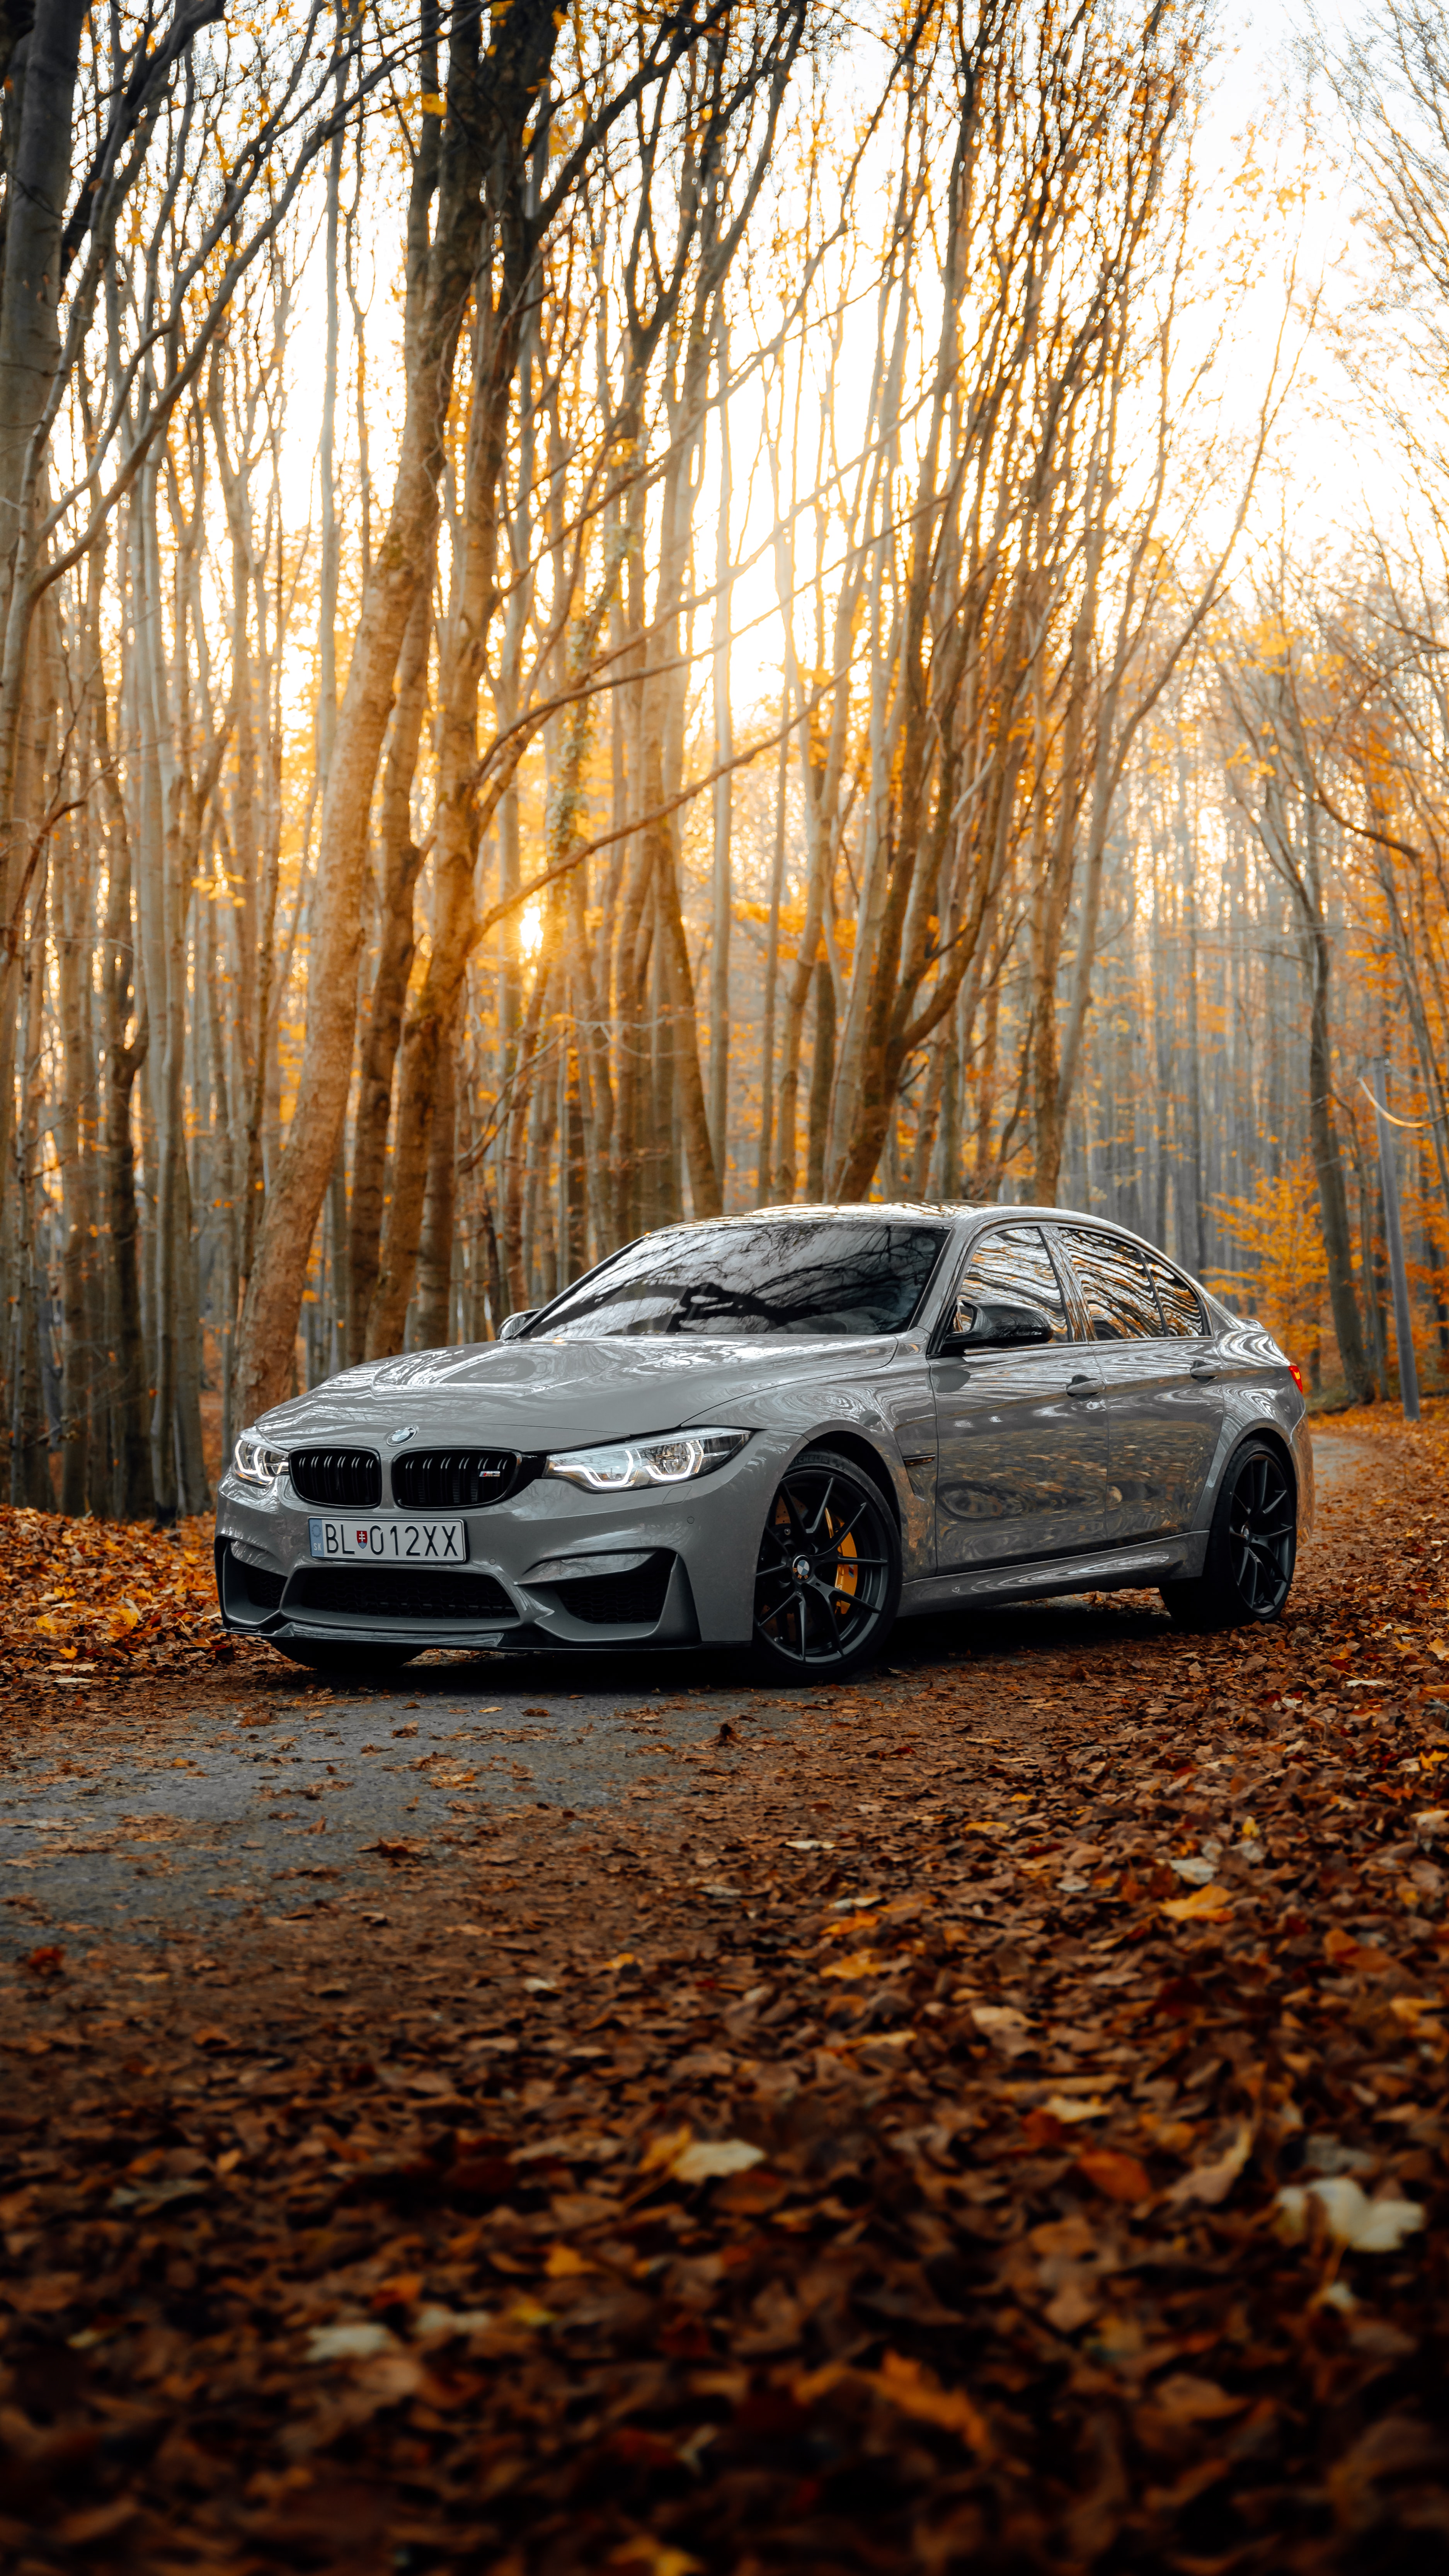 bmw, cars, bmw m3, car, autumn, side view, forest, grey lock screen backgrounds